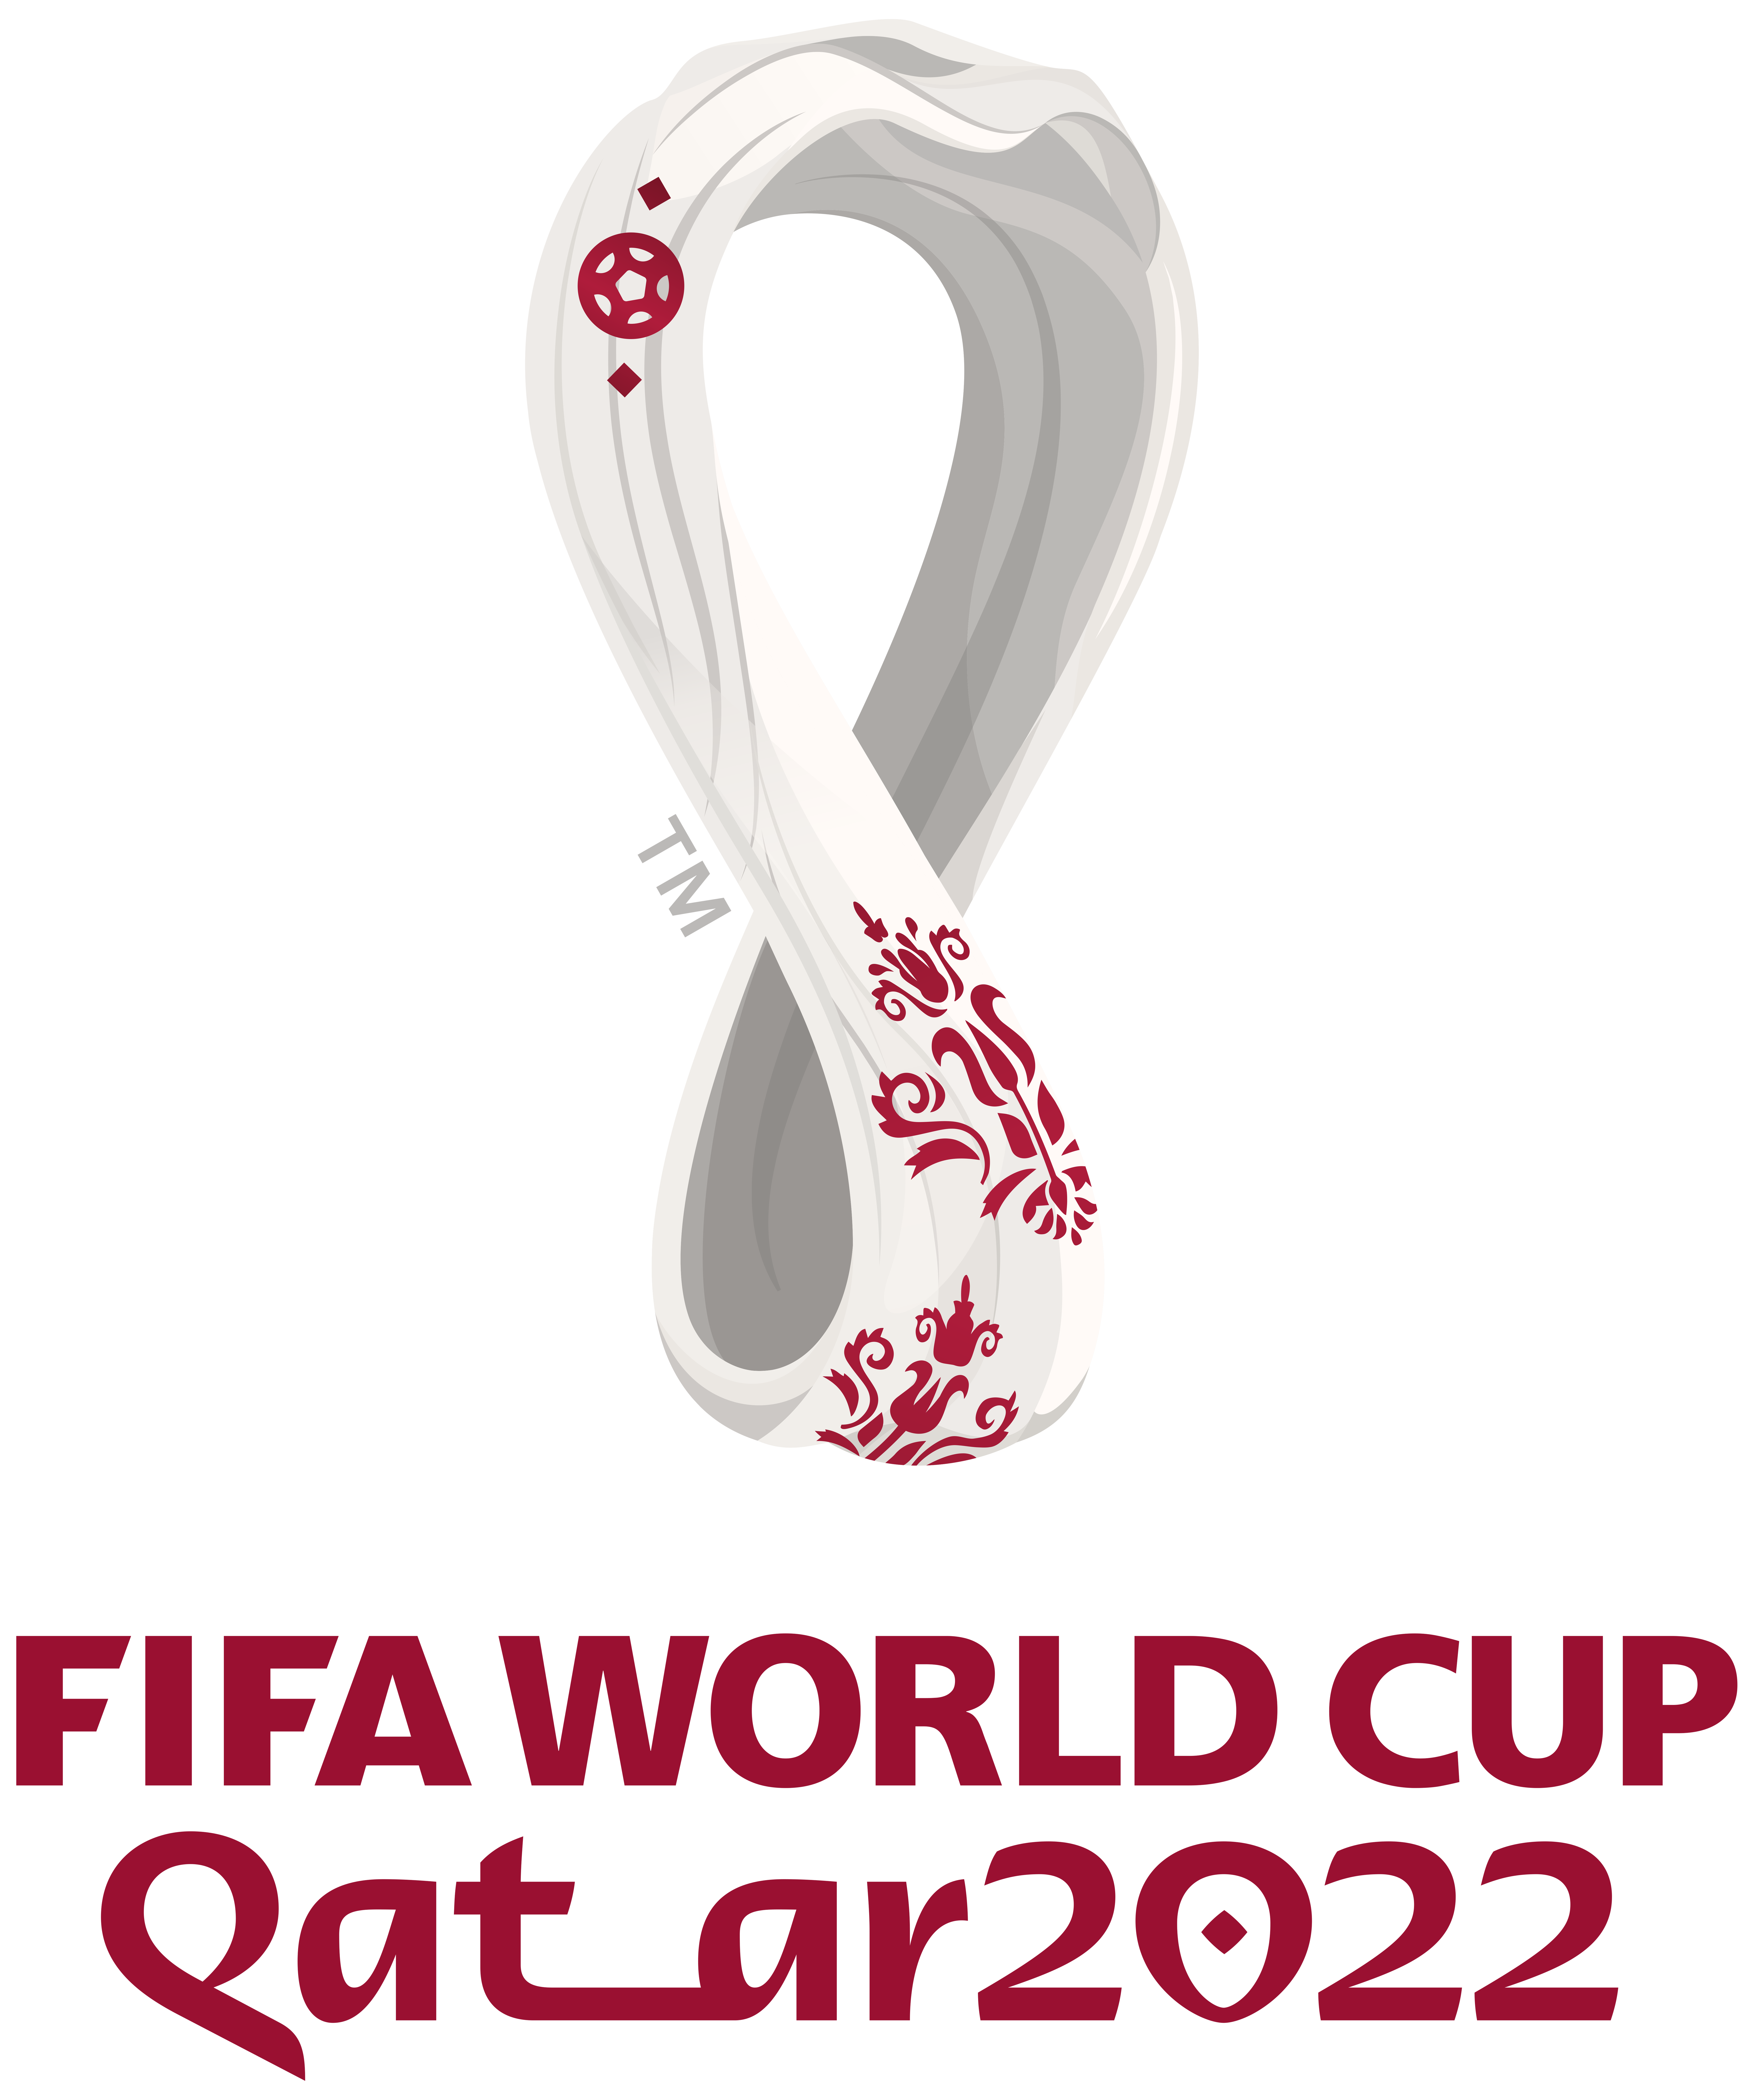 2022 Fifa World Cup PNG Transparent Images Free Download